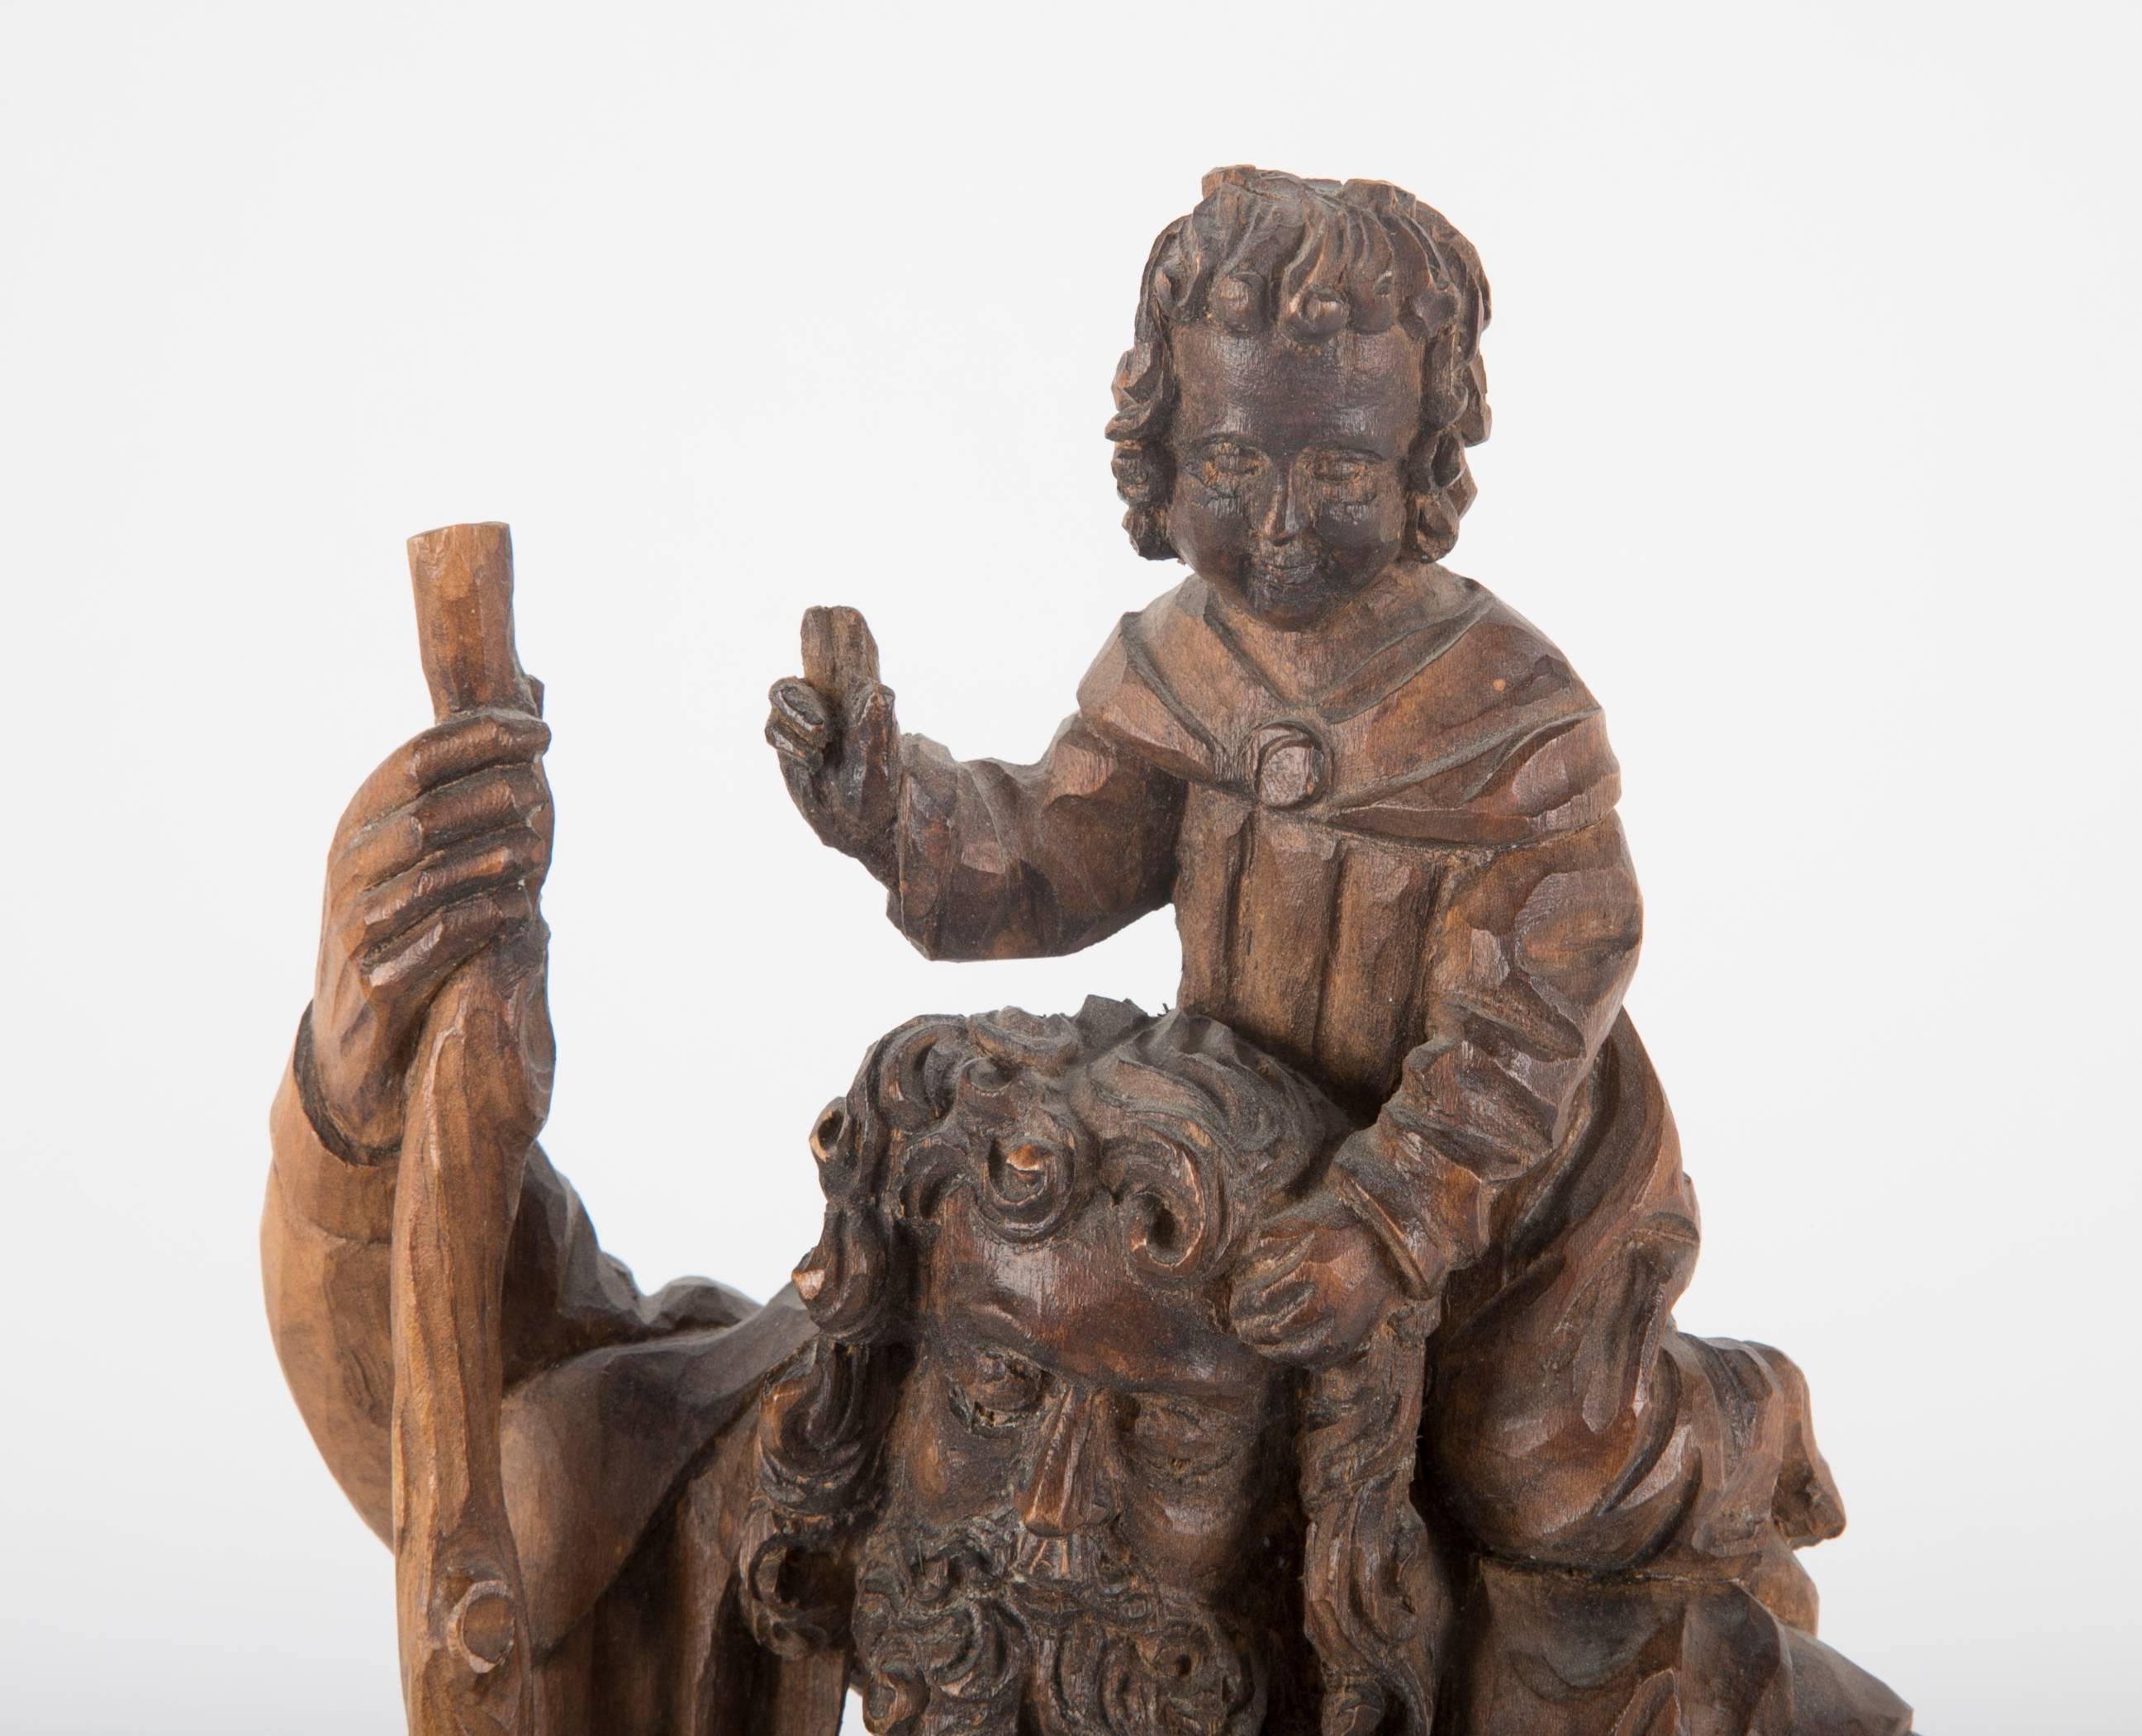 A 19th century German walnut carving of Saint Christopher carrying the Christ Child on his shoulders. Beautifully carved in the 15th century Gothic style. Labeled Oberammergau, a town in Bavaria known for its Passion Plays.